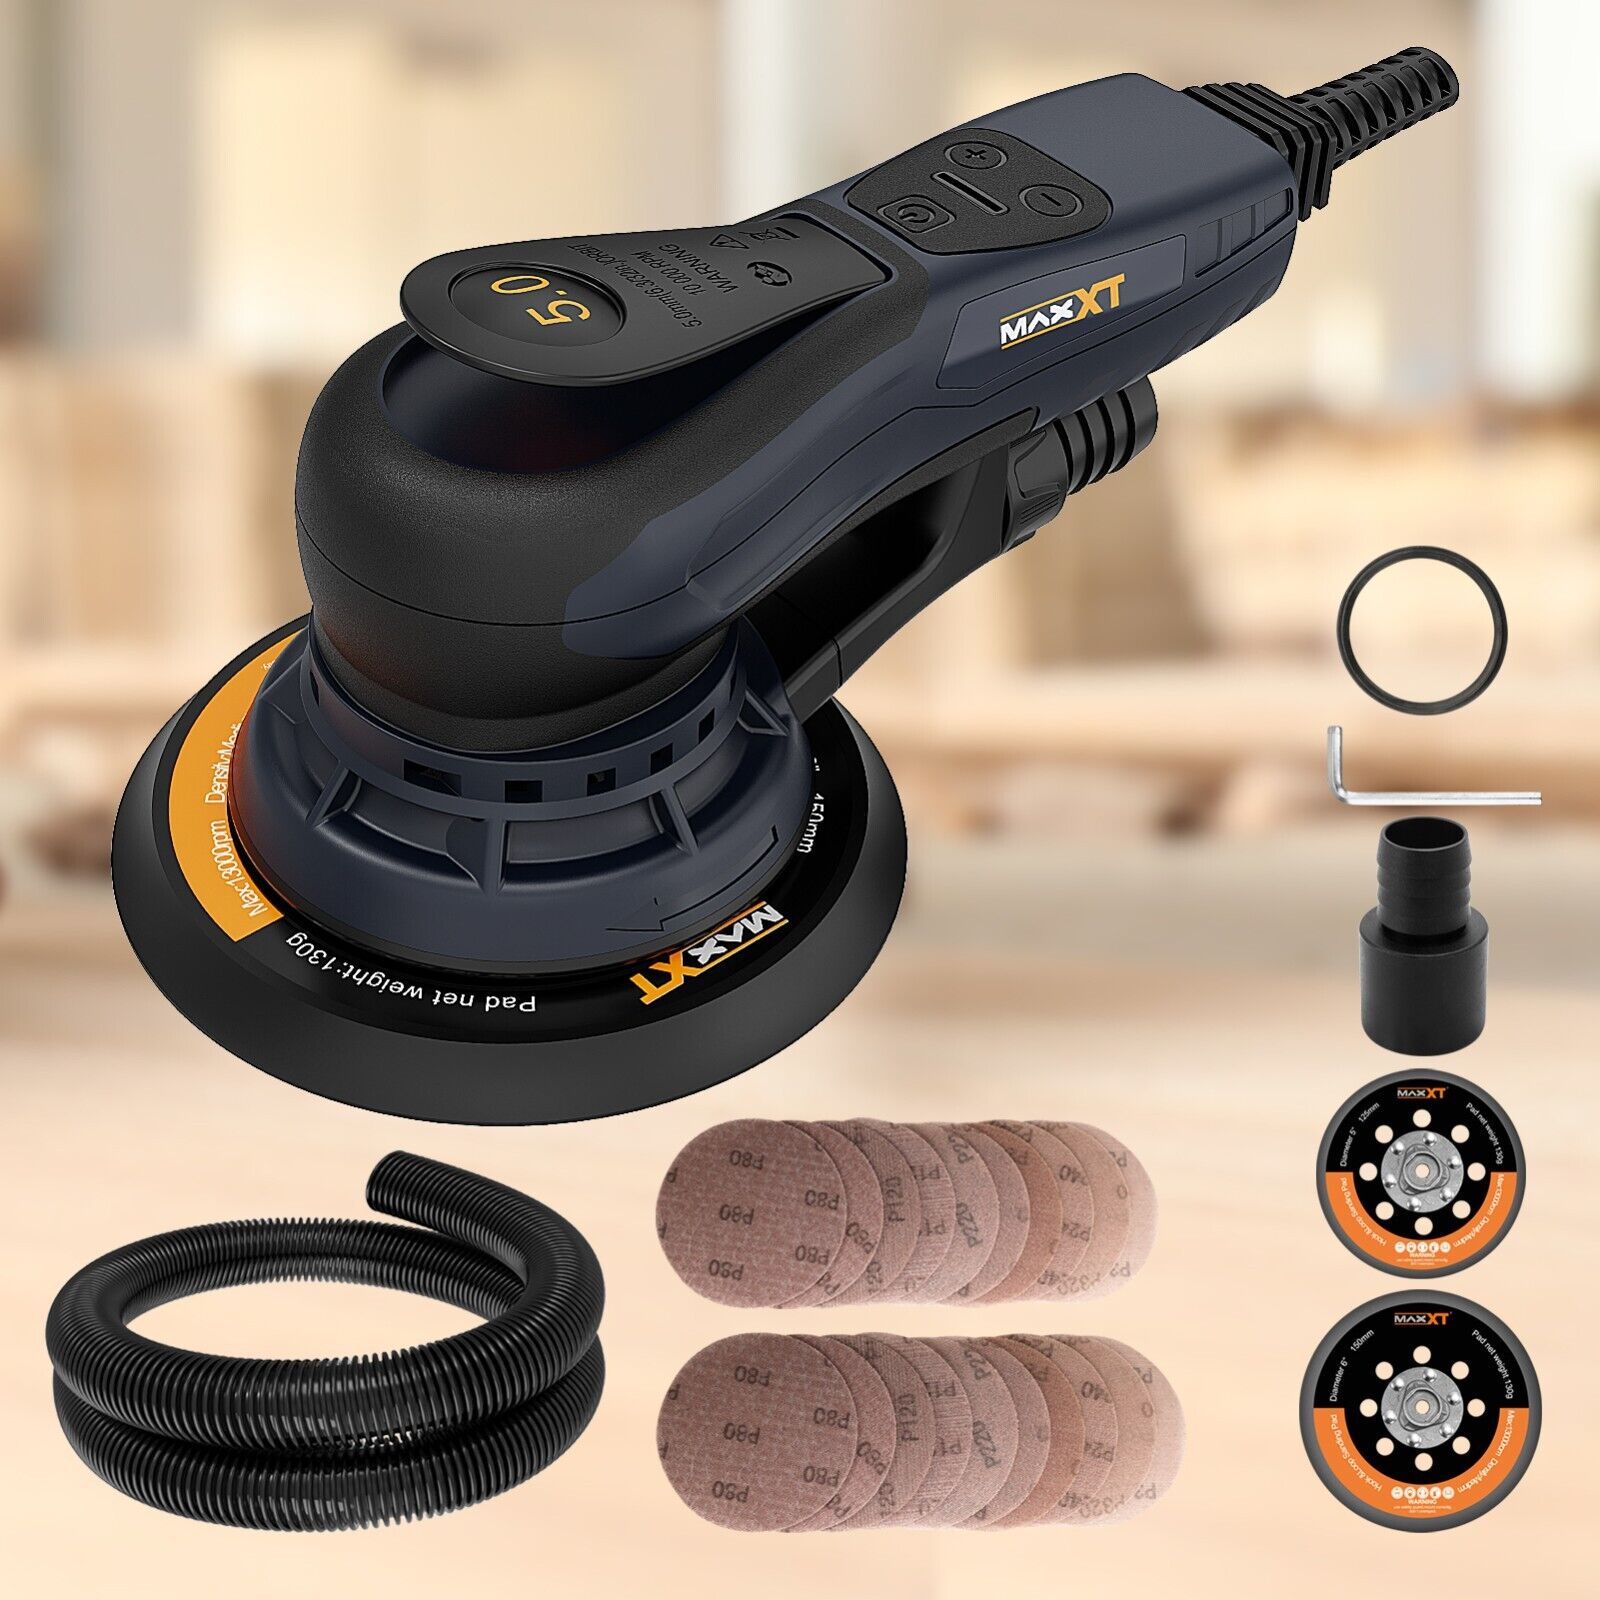 Electric Brushless Orbital Sander with Two Backing plates for Woodworking